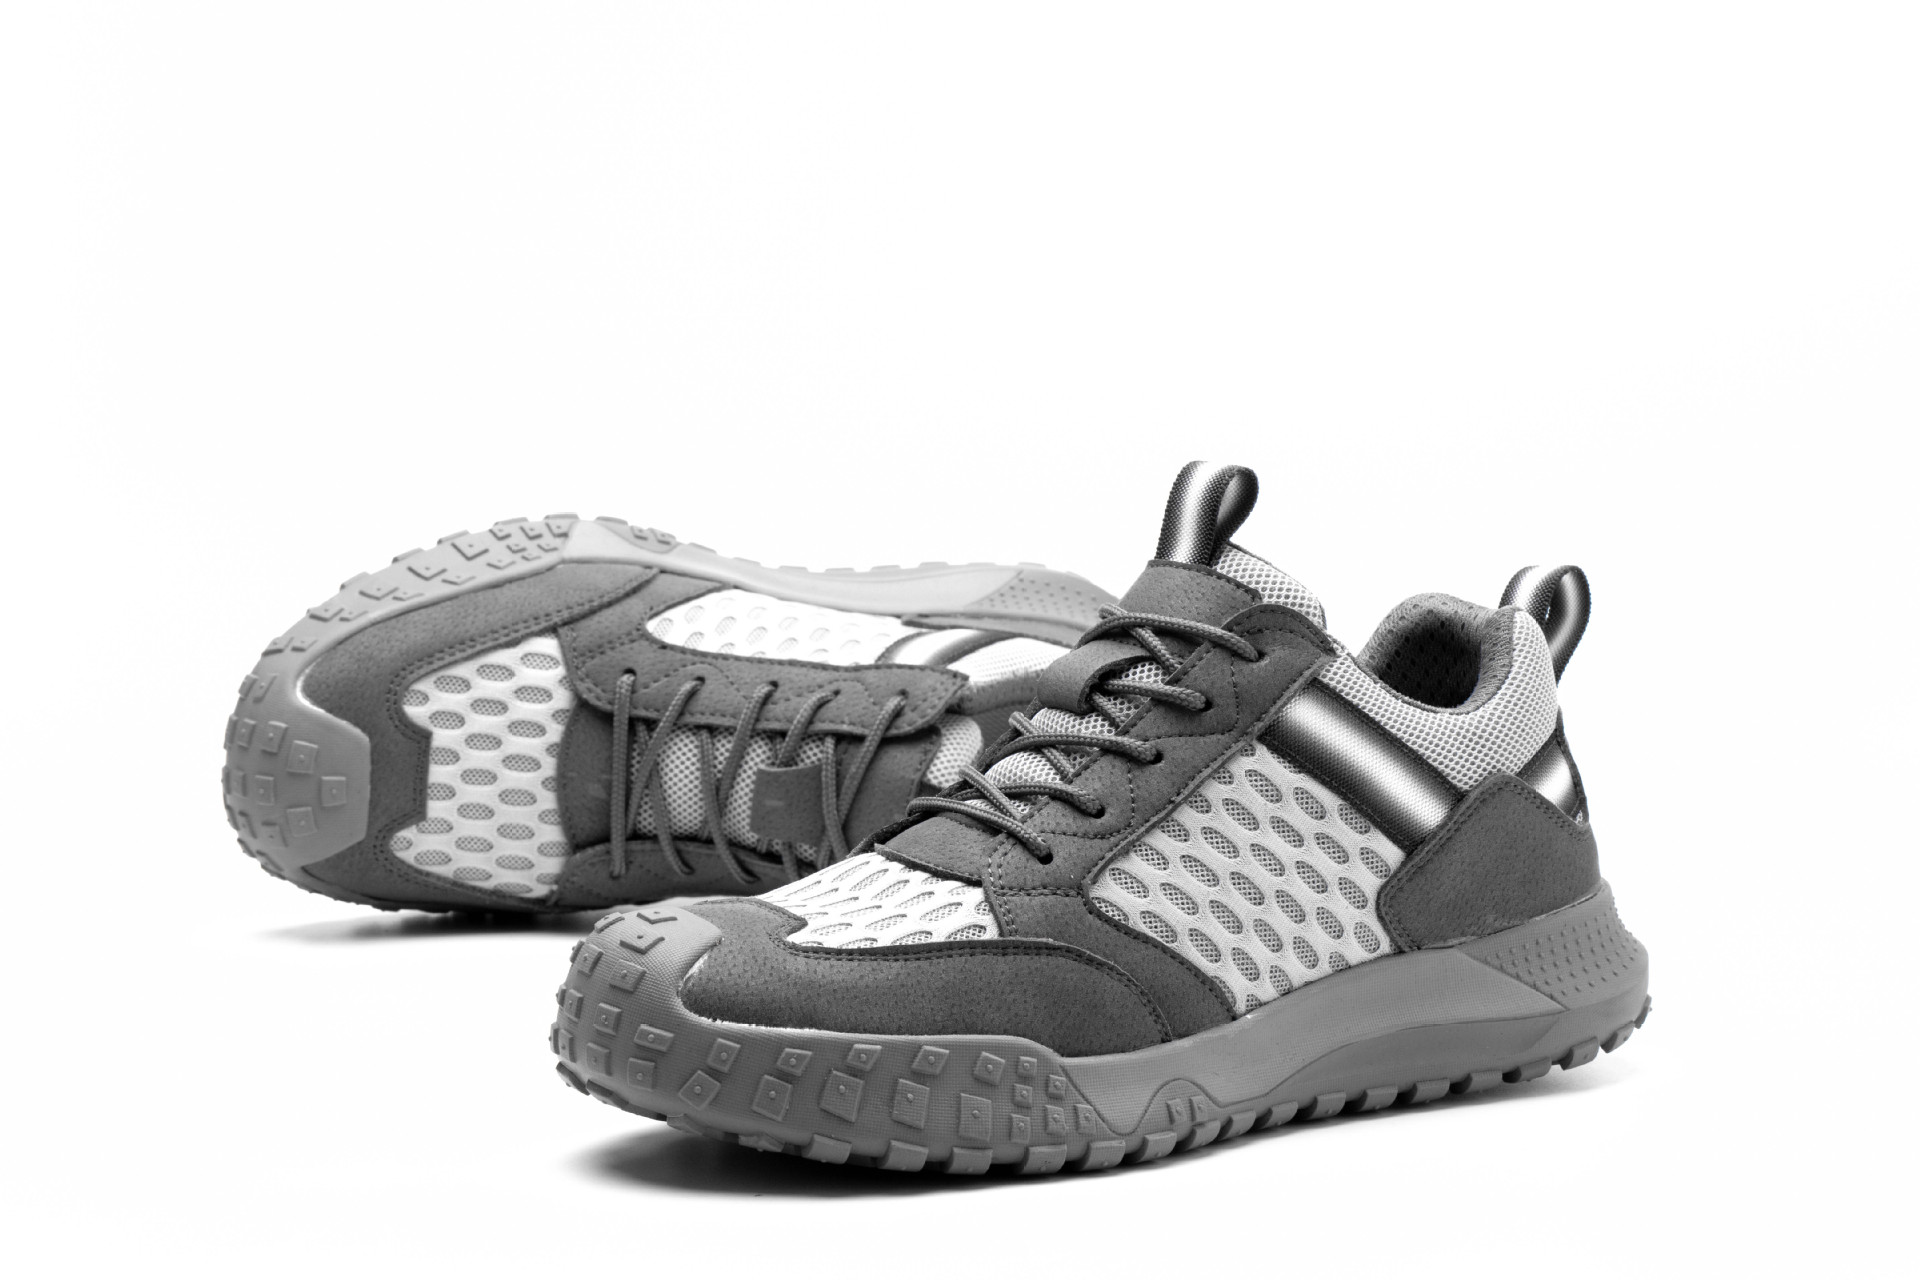 Customized Safety Shoes Men's Anti-Smashing and Anti-Penetration Lightweight Breathable, Non-Slip, Wear-Resistant Construction Site Work Shoes Protective Footwear Safety Shoes